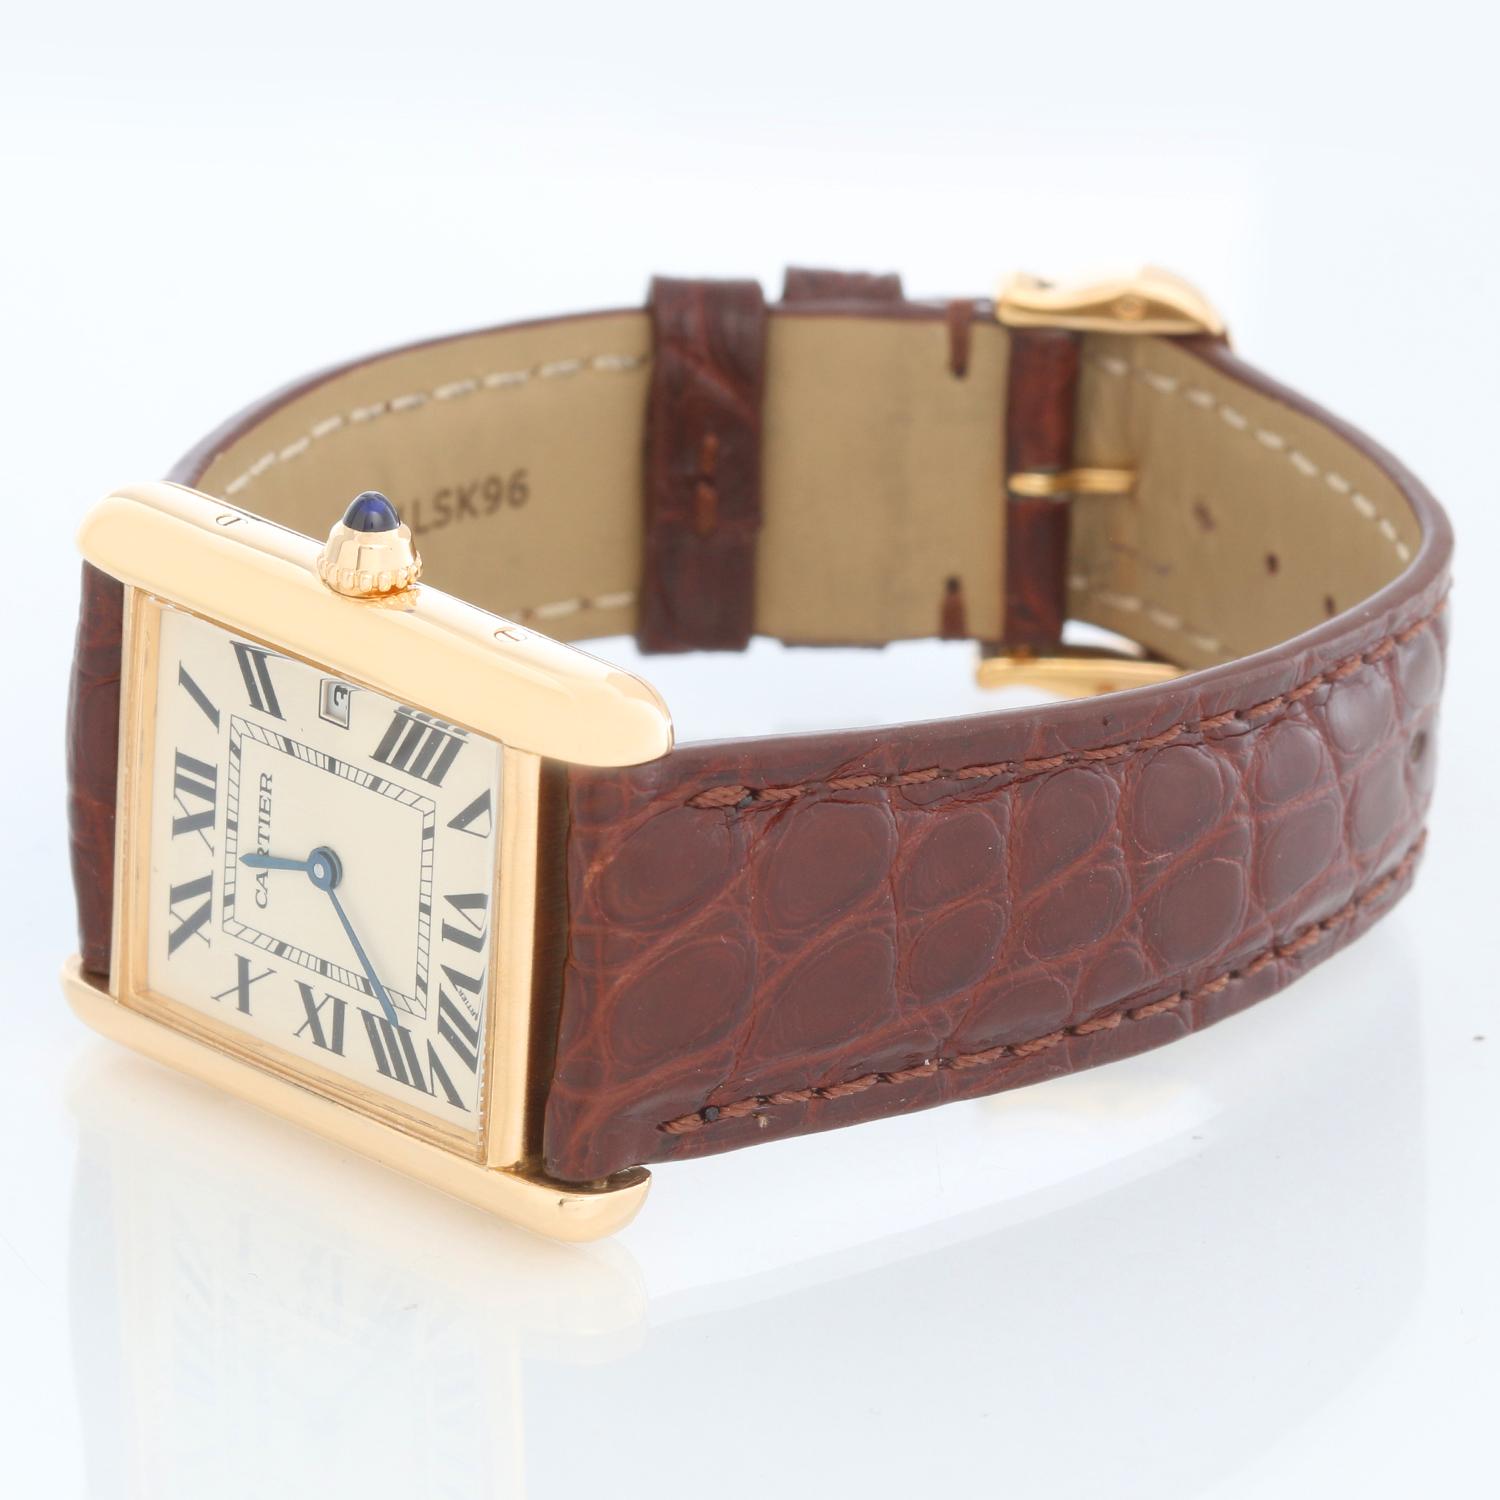 Cartier Tank Louis 18K Yellow Unisex Gold Watch W1529756 2441 - Quartz. 18K Yellow Gold ( 26 x 34 mm ). Flat Ivory dial with Roman numerals; date at 3 o'clock. Cartier alligator strap with Cartier tang gold buckle. Pre-owned with Custom box.